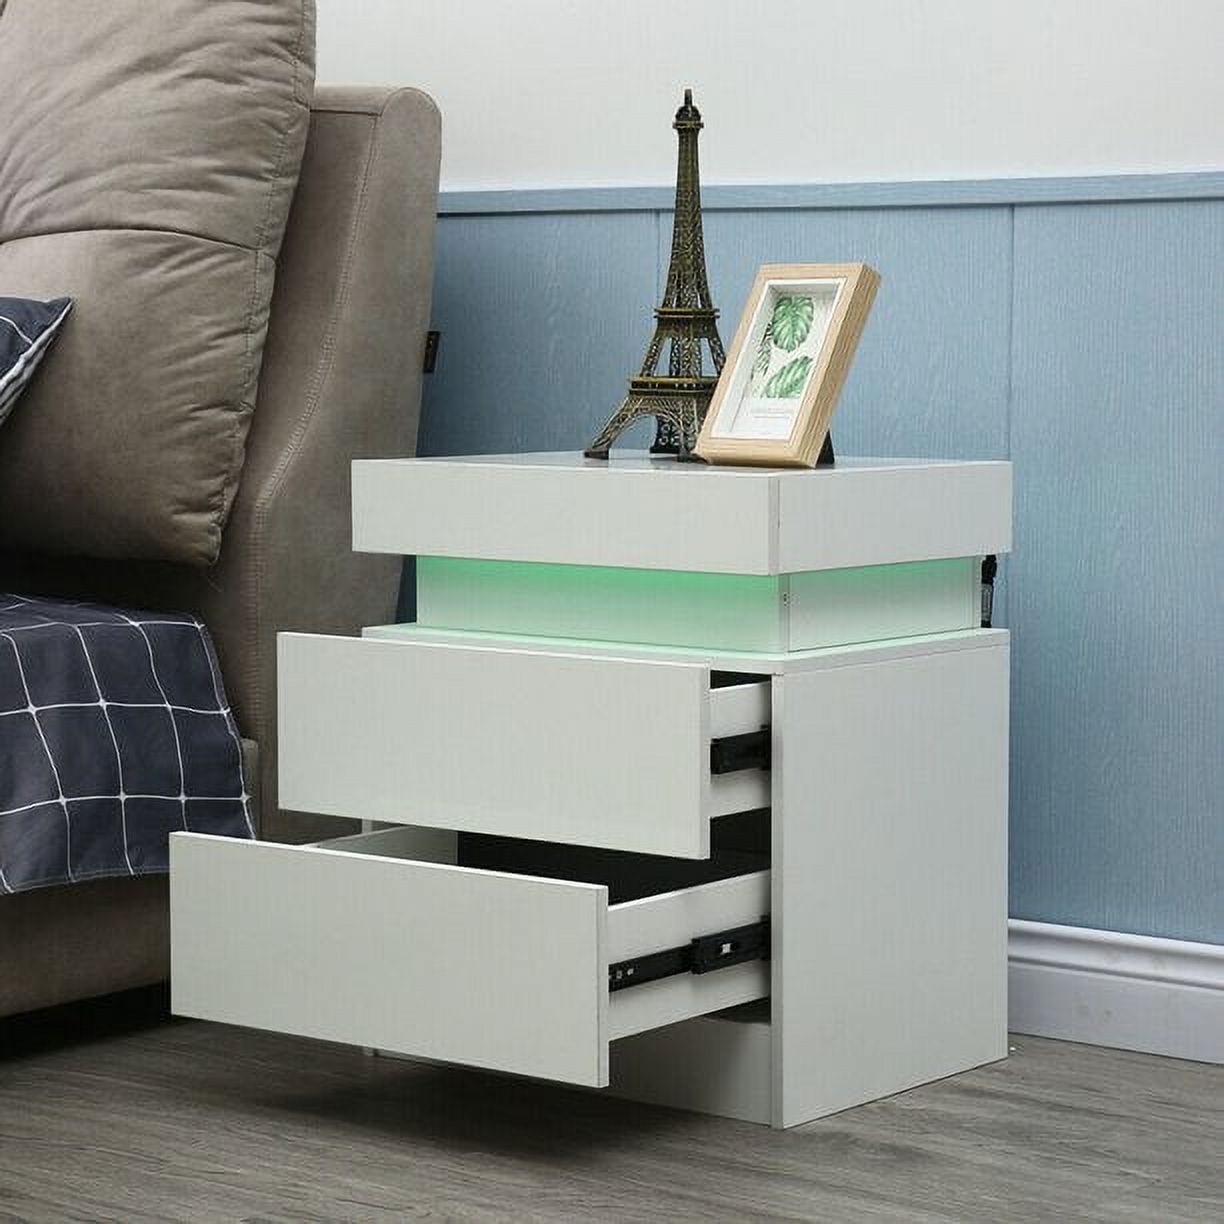 LED Nightstand Modern Nightstand with Led Lights Wood Led Bedside Table Nightstand with 2 High Gloss Drawers for Bedroom, Dorm, White - image 2 of 8